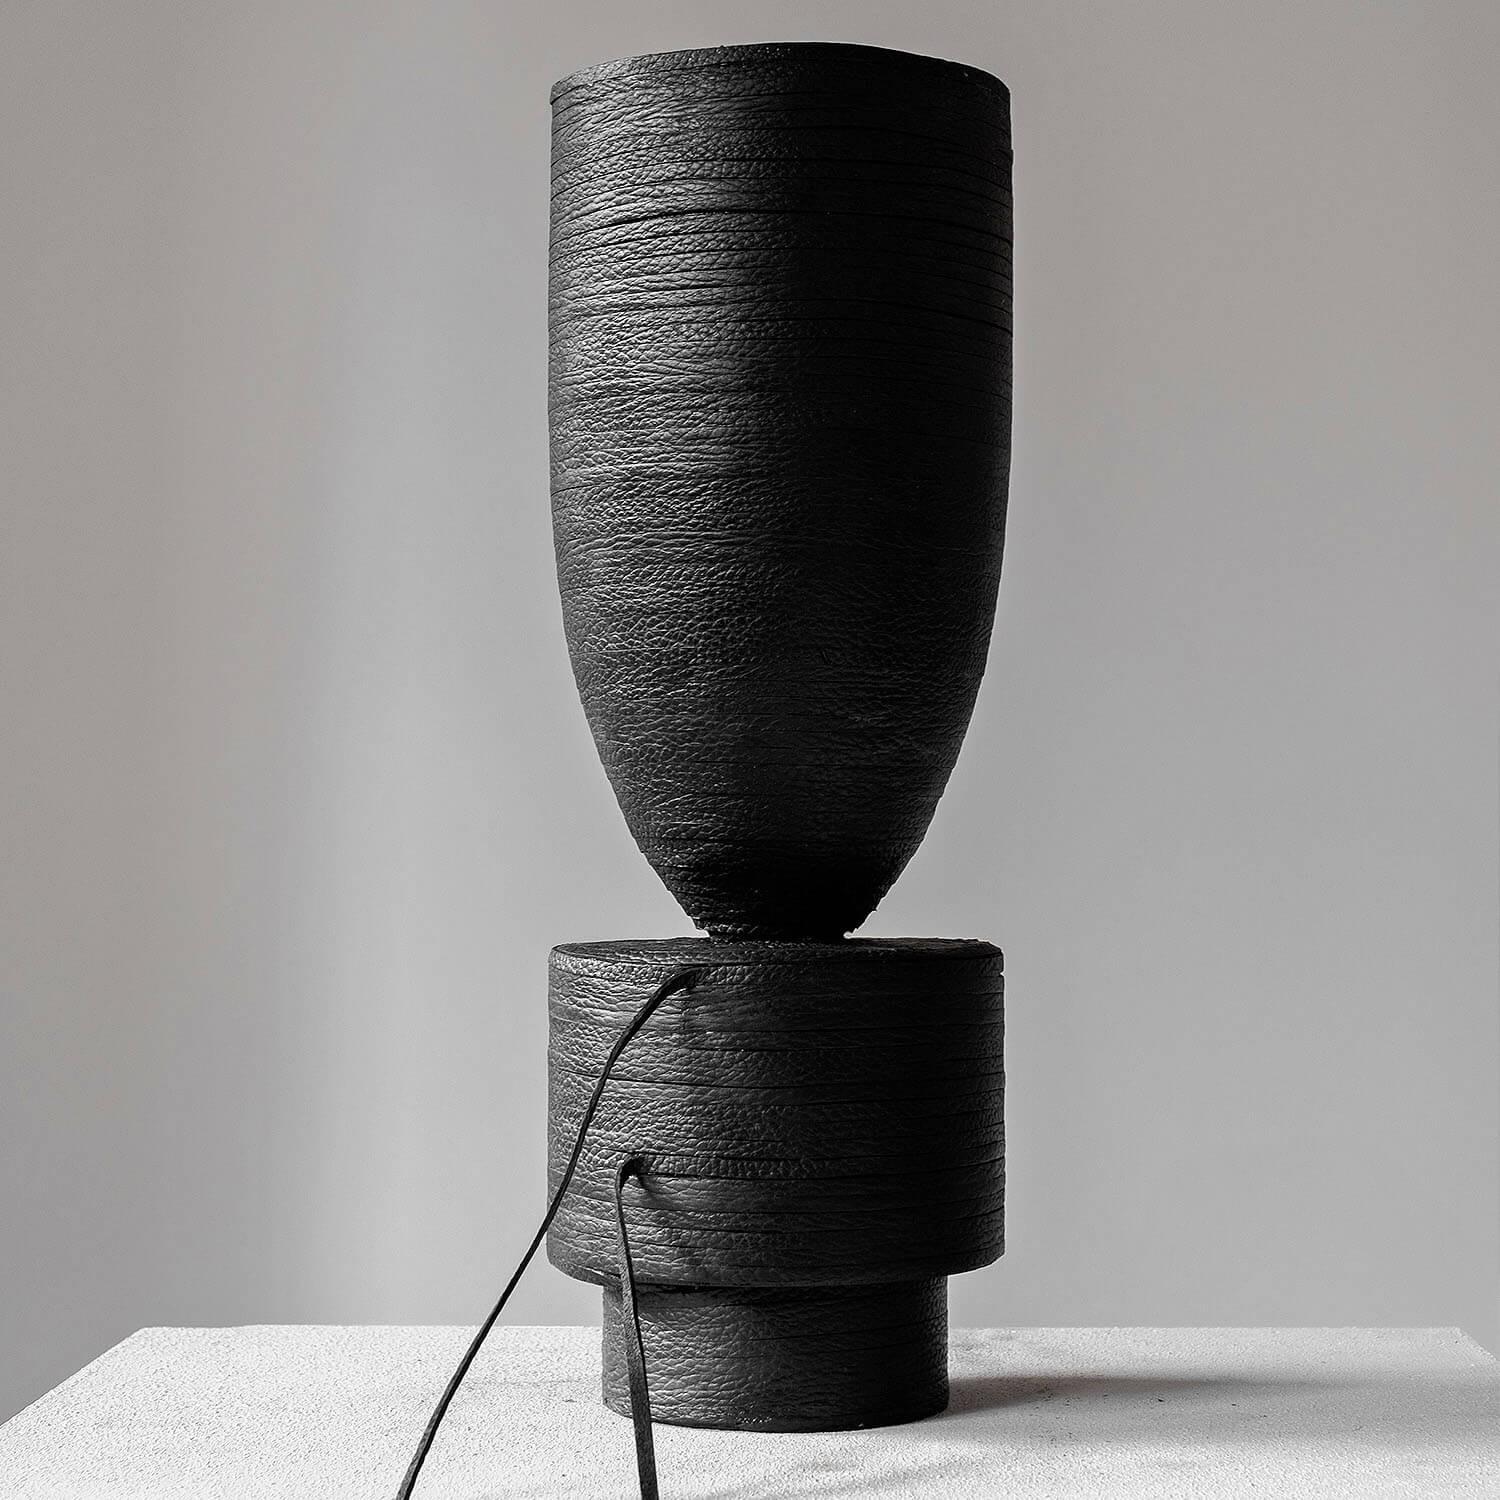 Pot vase leather, Arno Declercq

Measures: 14 cm L x 14 cm W x 40 cm H
5.5” L x 5.5” W x 15.7” H
Material: Iroko wood and leather 
Signed by Arno Declercq.

Arno Declercq
Belgian designer and art dealer who makes bespoke objects with passion